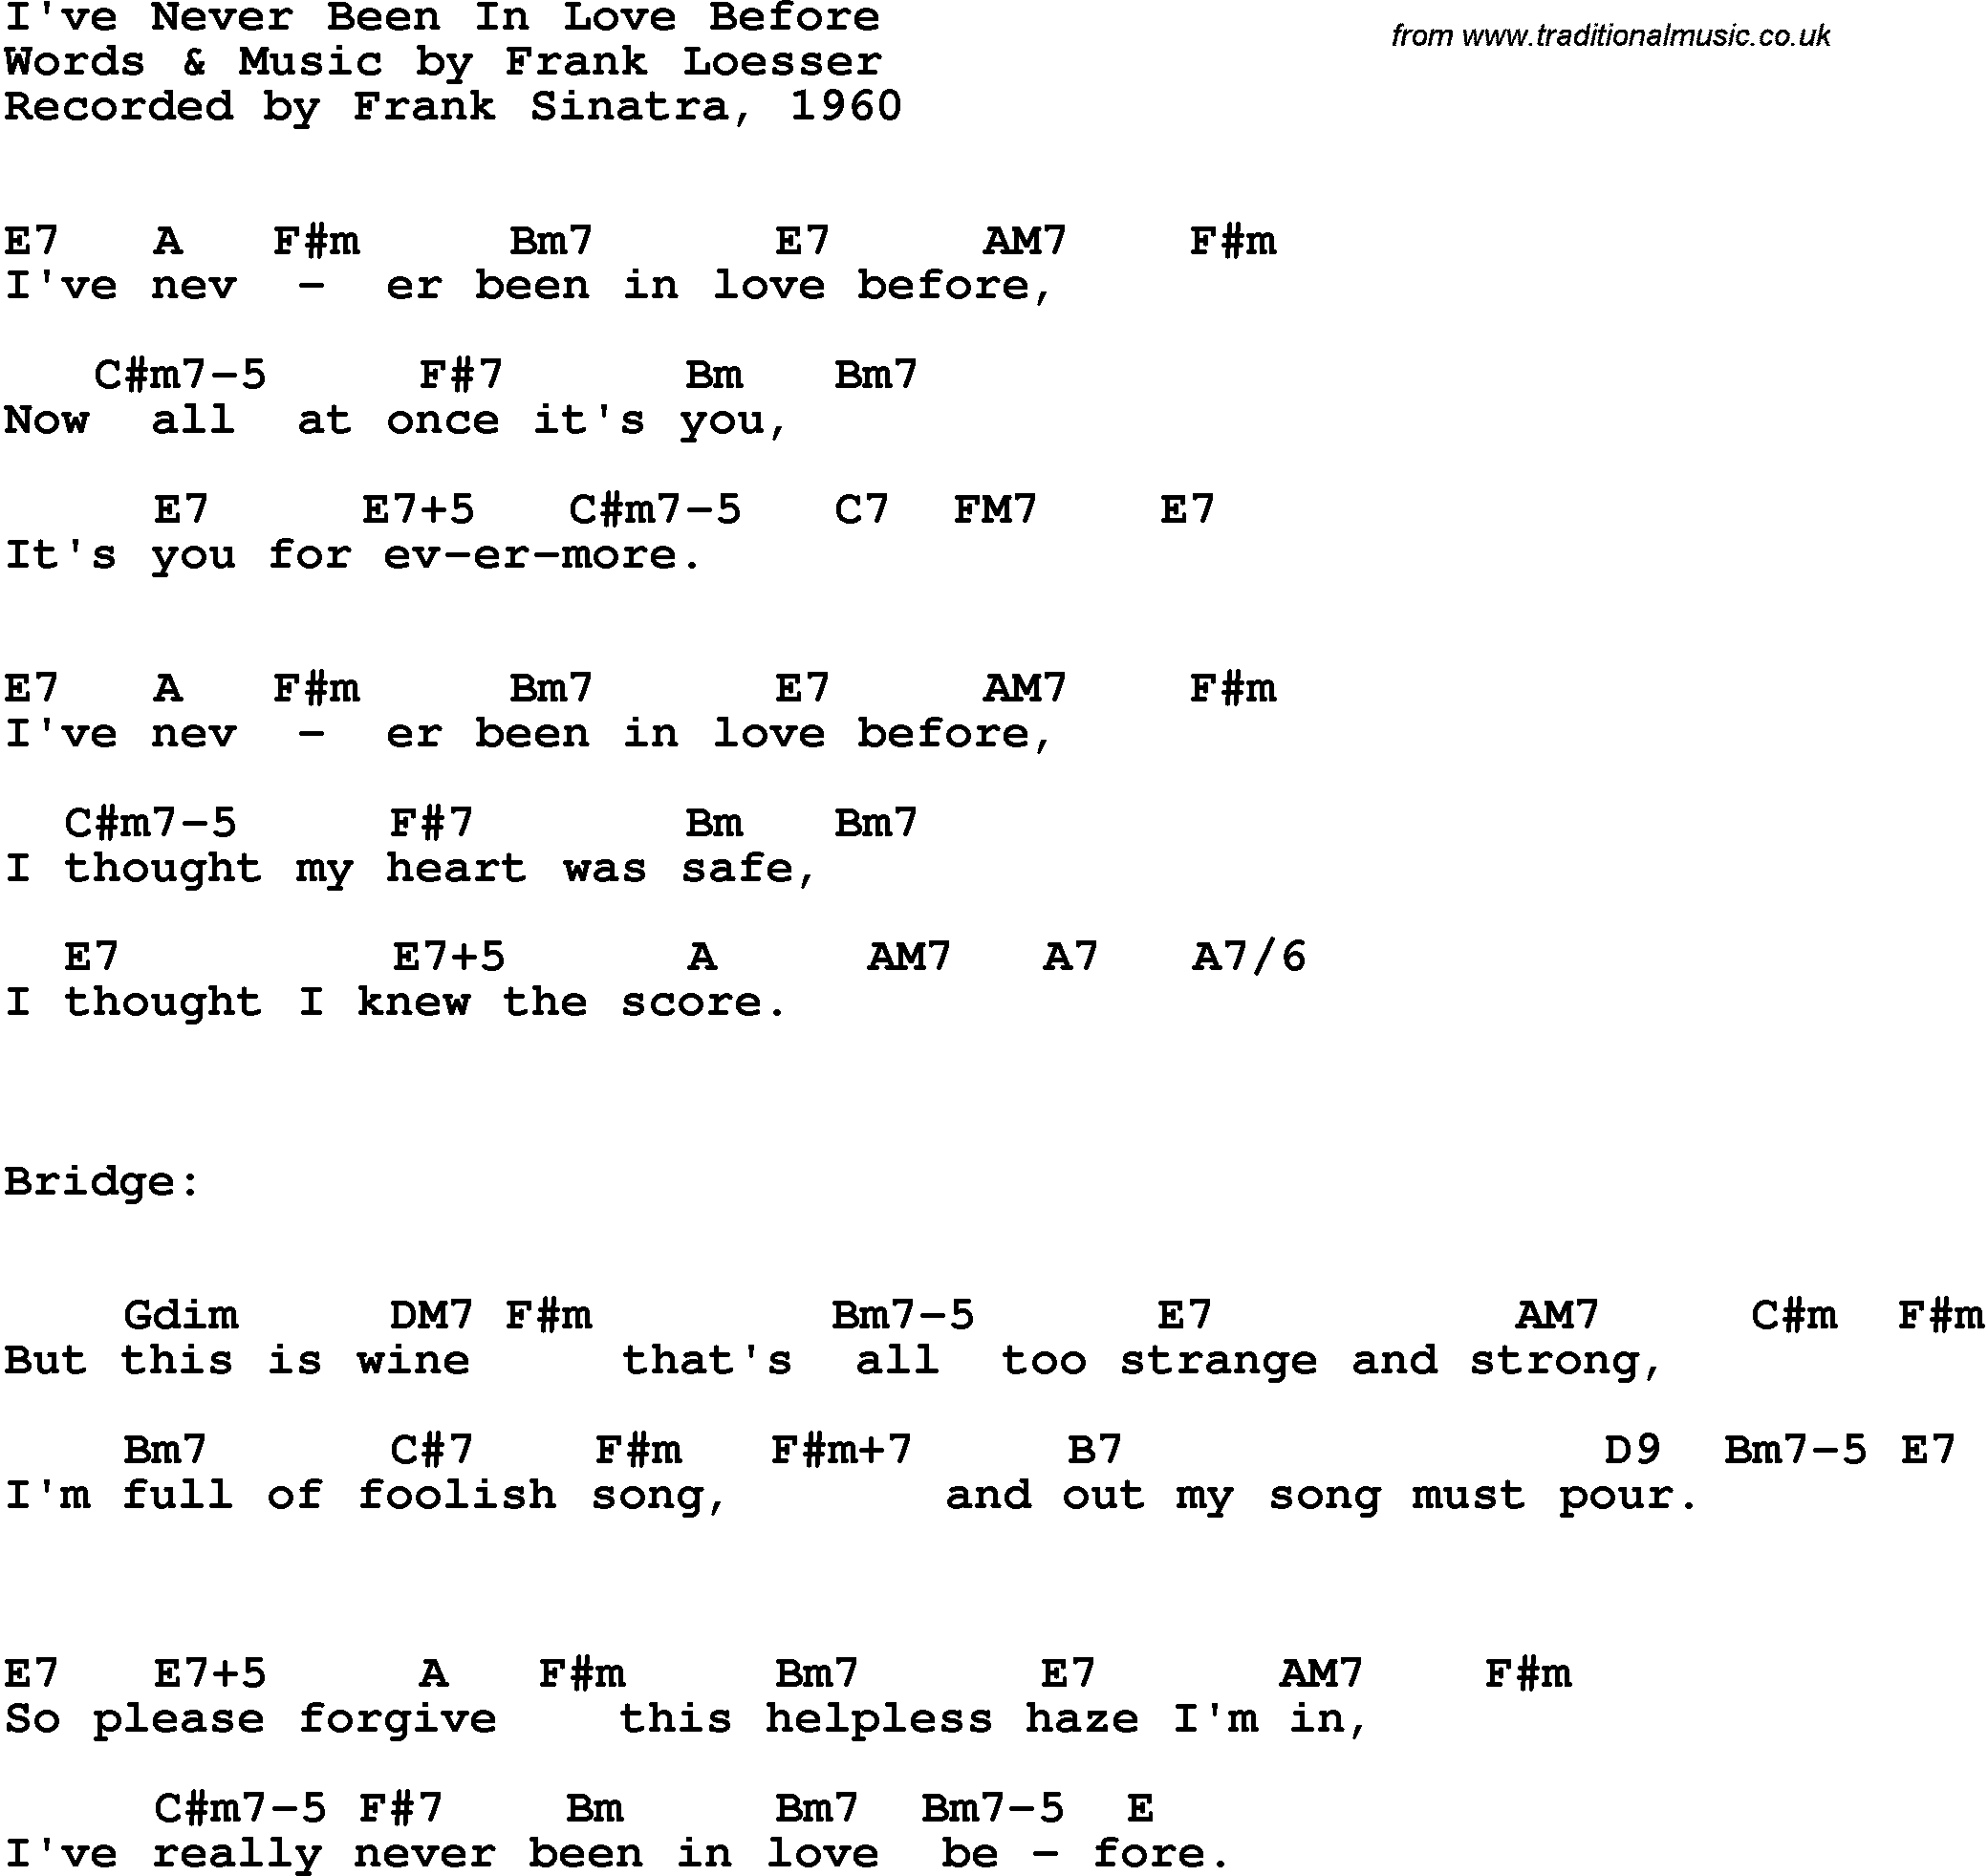 Song Lyrics with guitar chords for I've Never Been In Love Before - Frank Sinatra, 1960